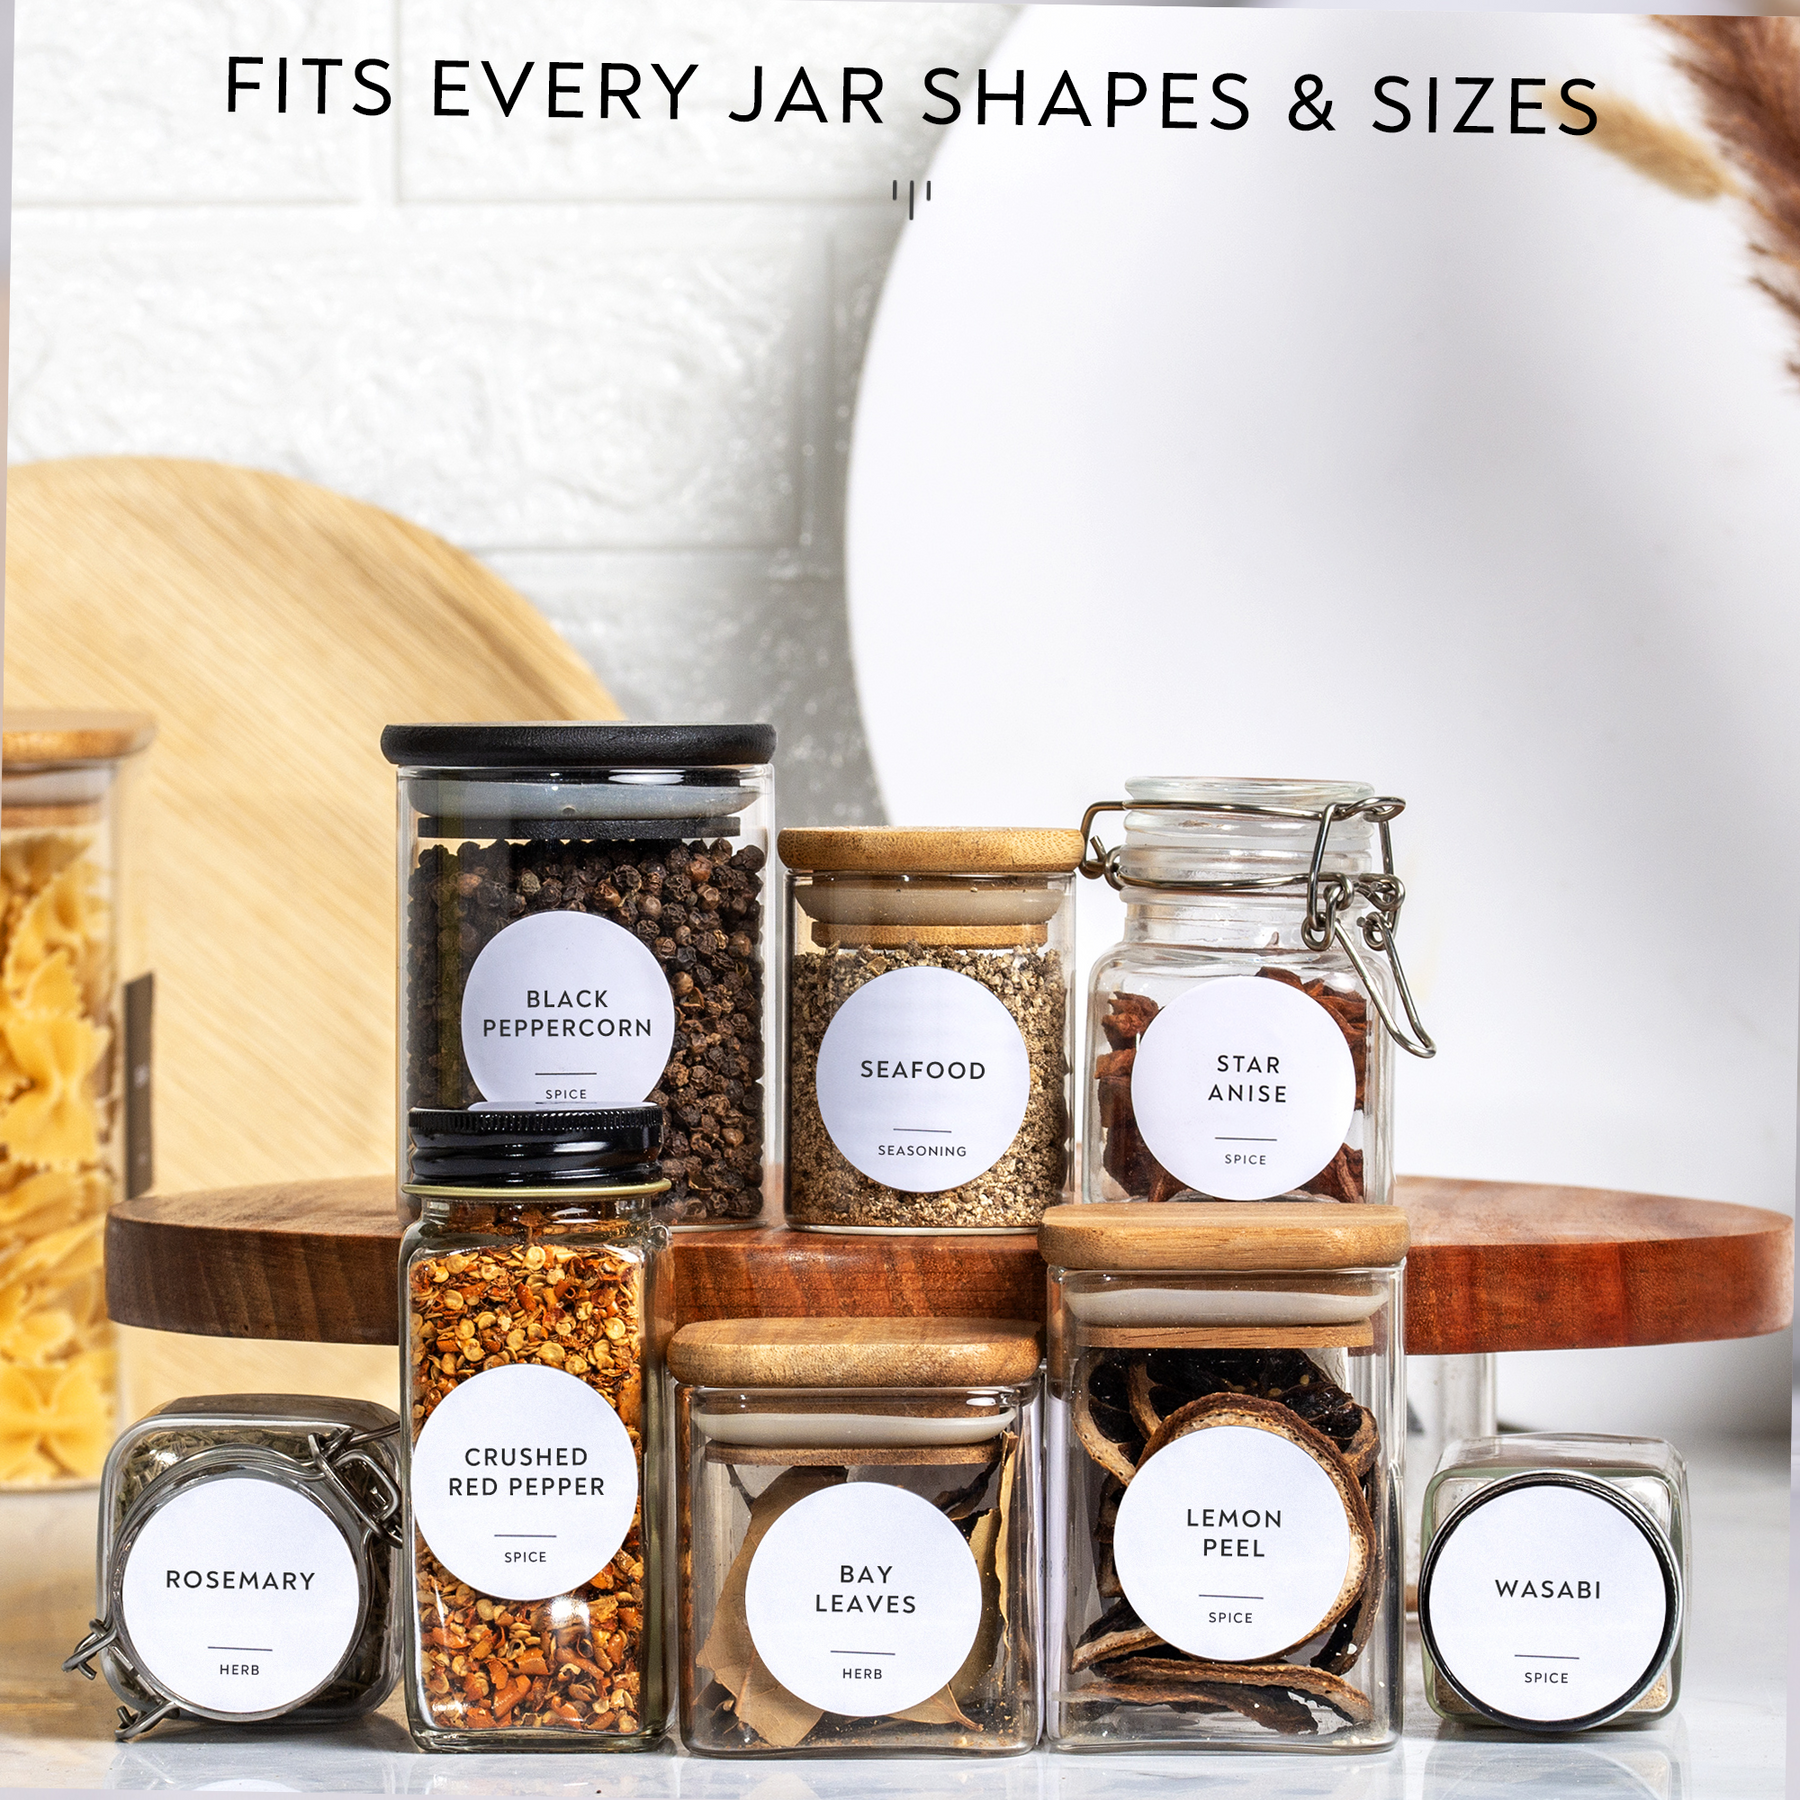 Small Round Labels fit Libbey Glass Spice Jars